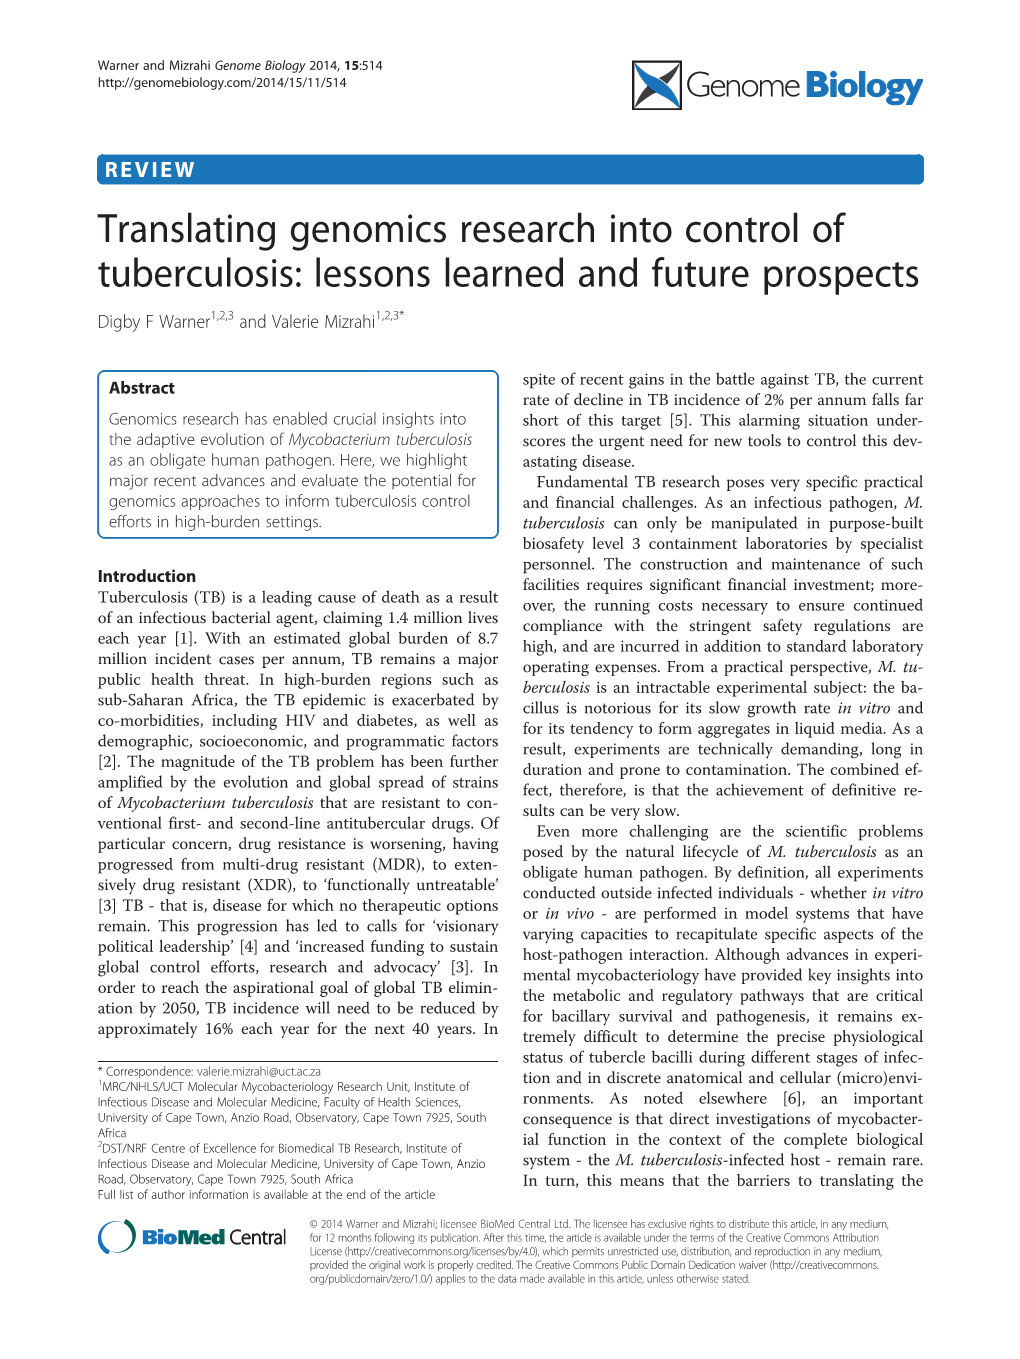 Translating Genomics Research Into Control of Tuberculosis: Lessons Learned and Future Prospects Digby F Warner1,2,3 and Valerie Mizrahi1,2,3*